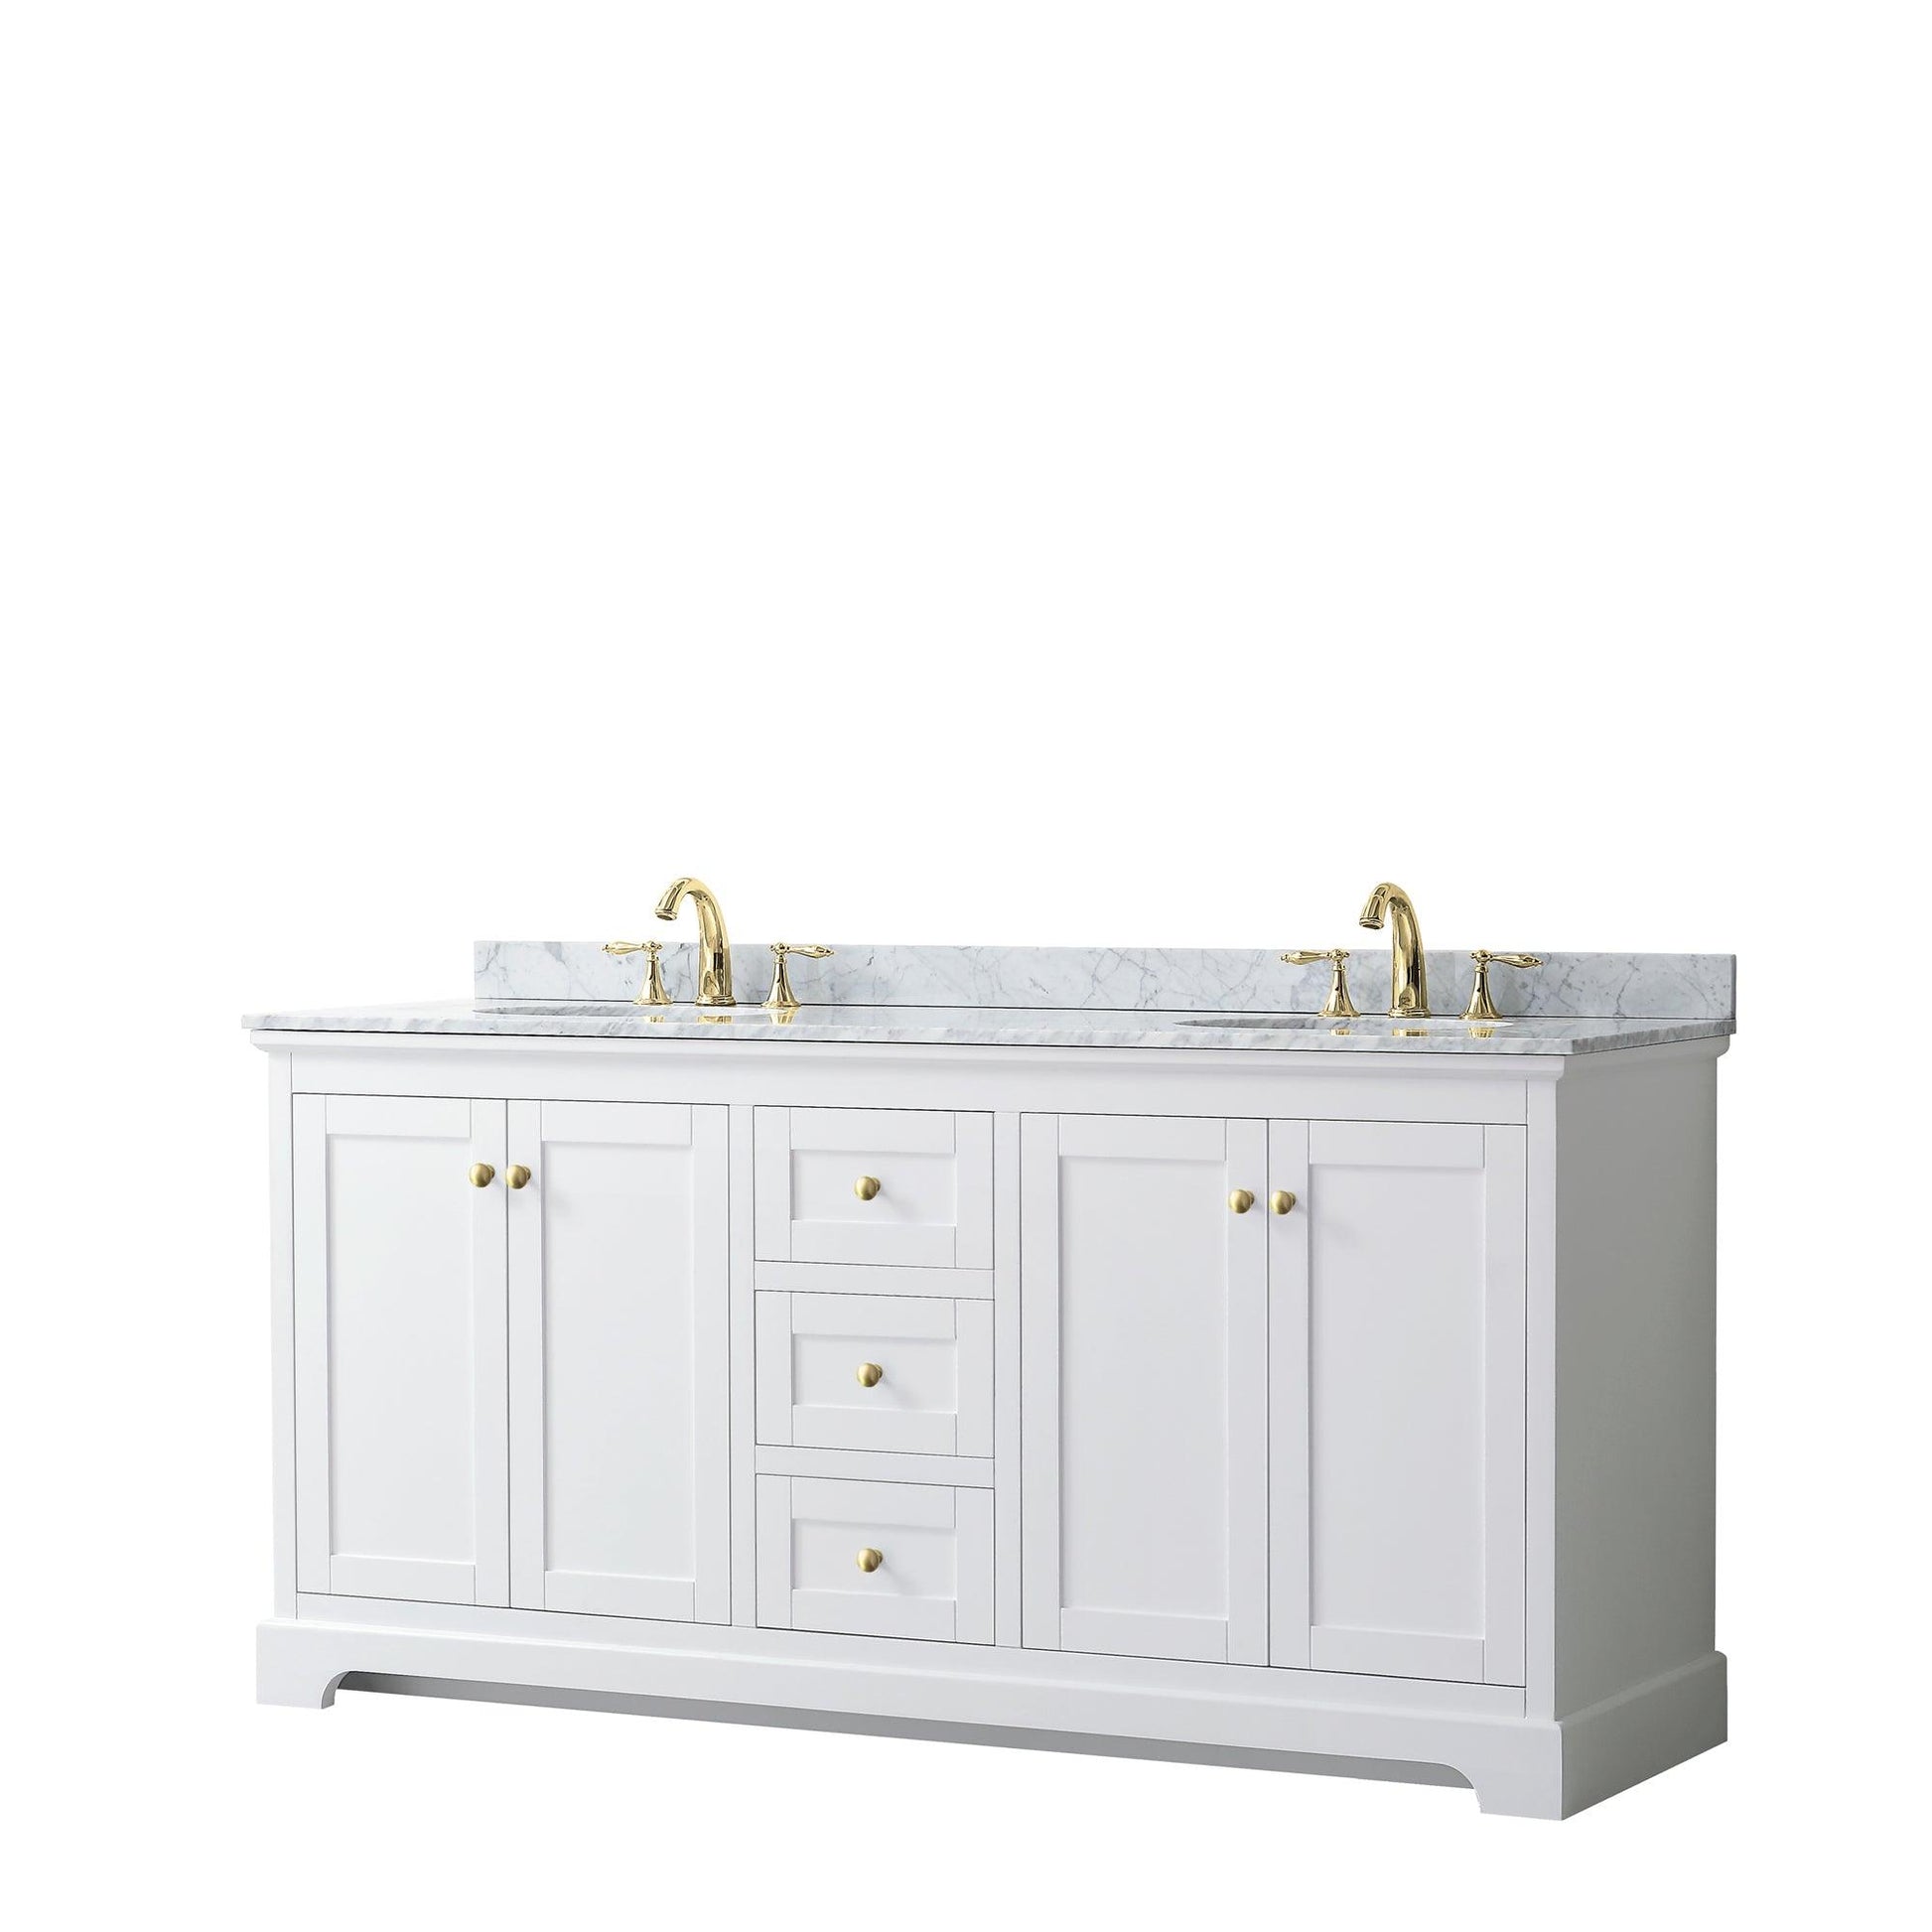 
  
  Wyndham Collection Avery Double Bathroom Vanity in White, White Carrara Marble Countertop, Undermount Oval Sinks, Optional Mirror, Brushed Gold Trim
  
